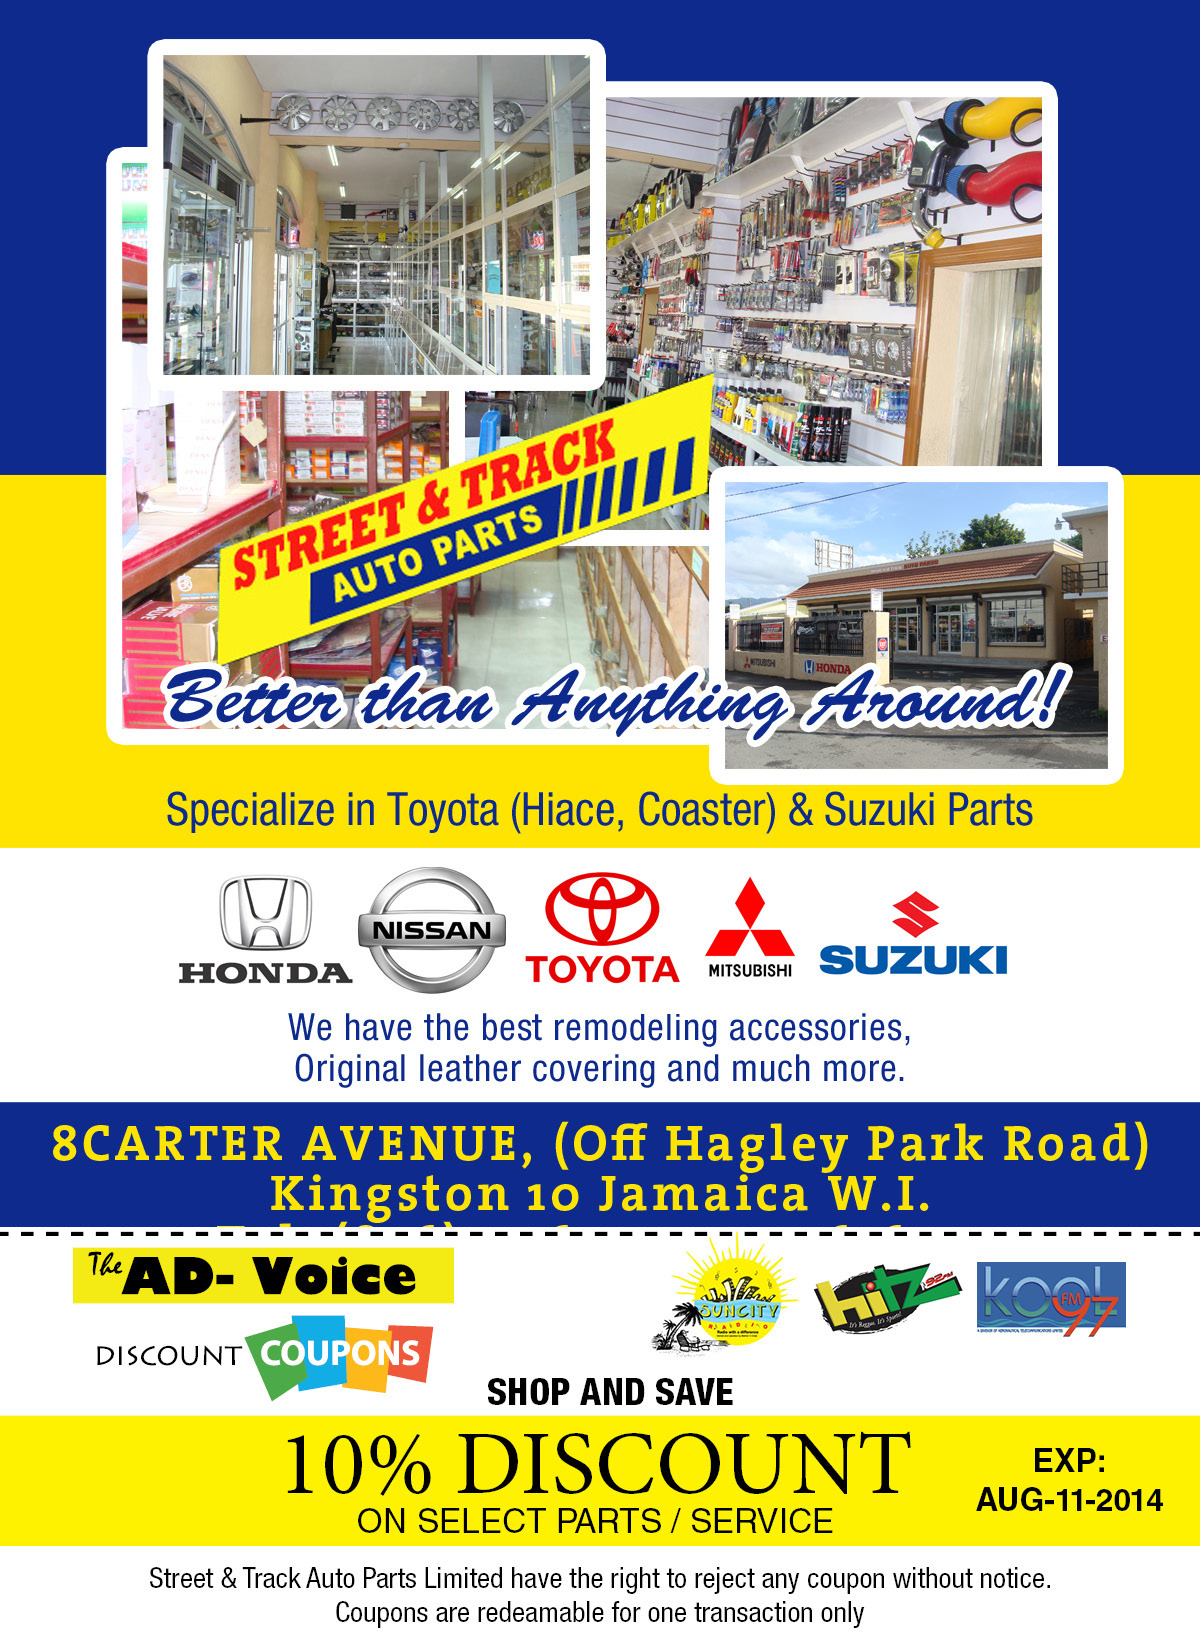 Local Business Street & Track Auto Parts in Kingston St. Andrew Parish